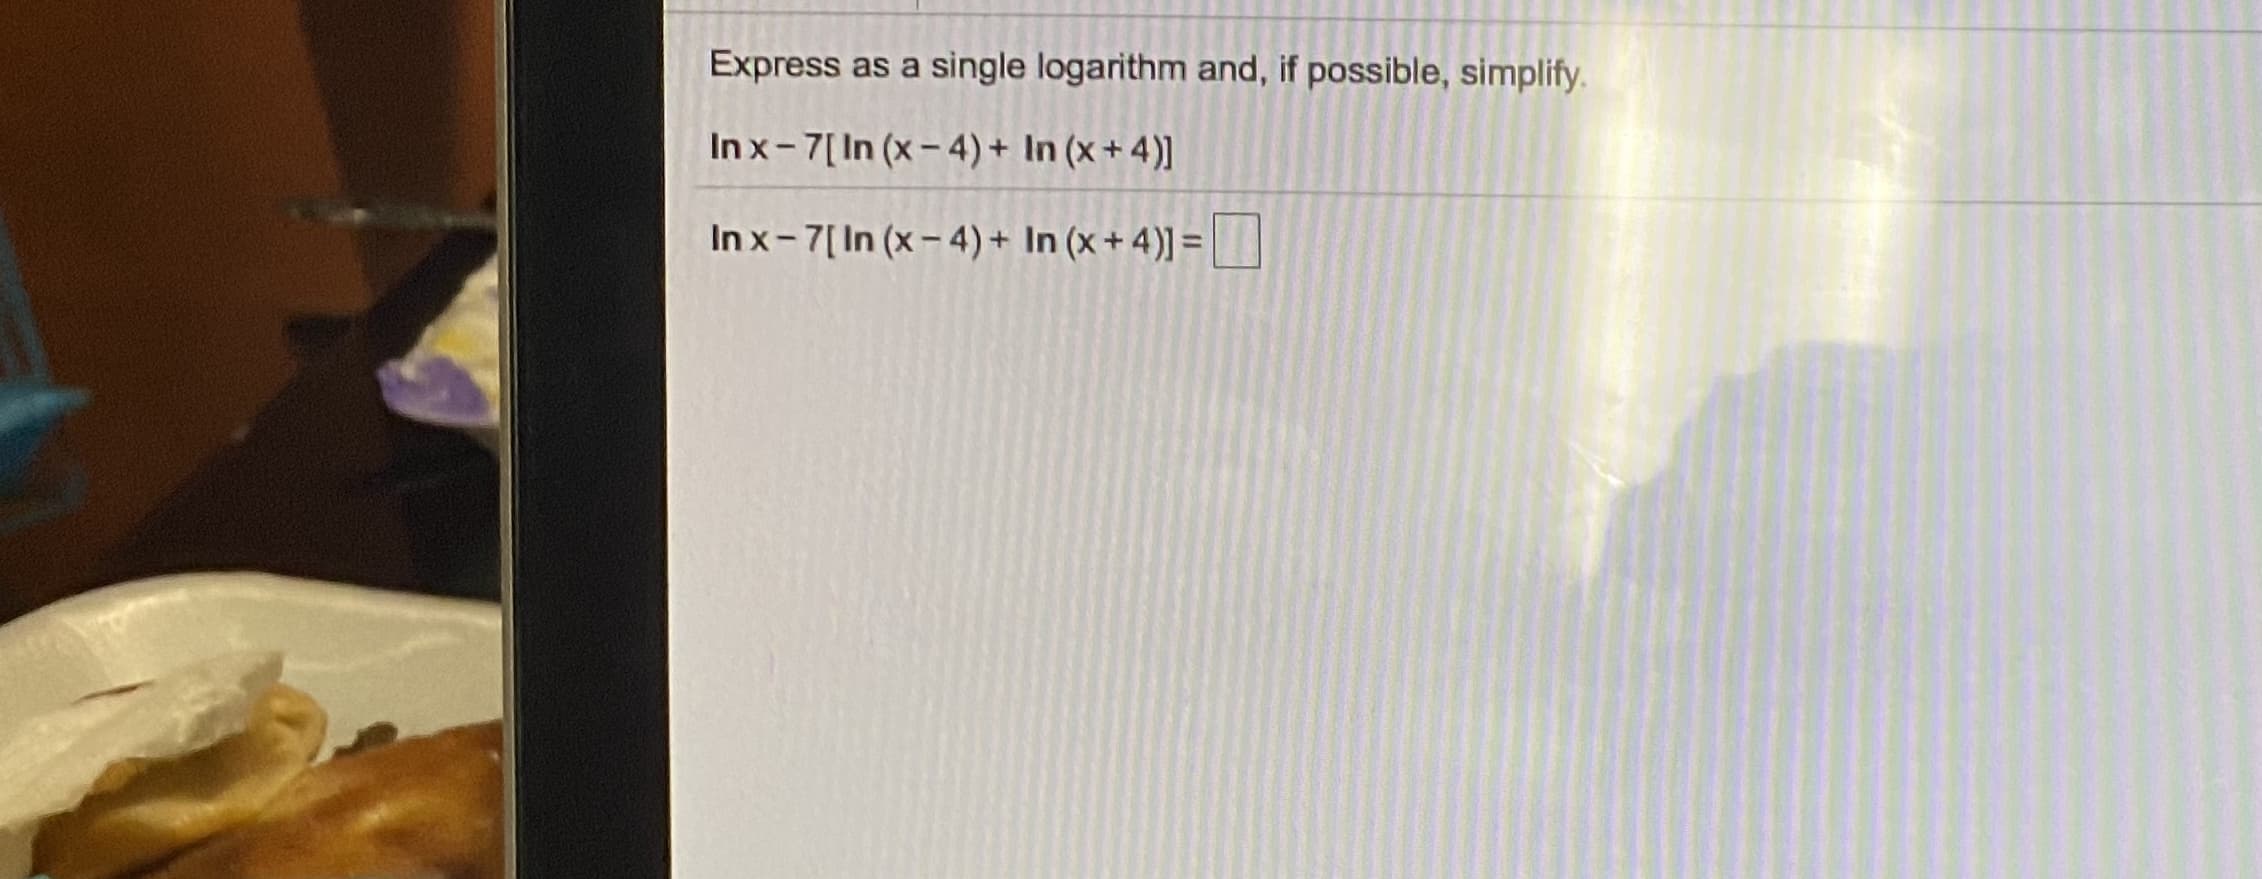 Express as a single logarithm and, if possible, simplify.
Inx-7[In (x- 4) + In (x + 4)]
